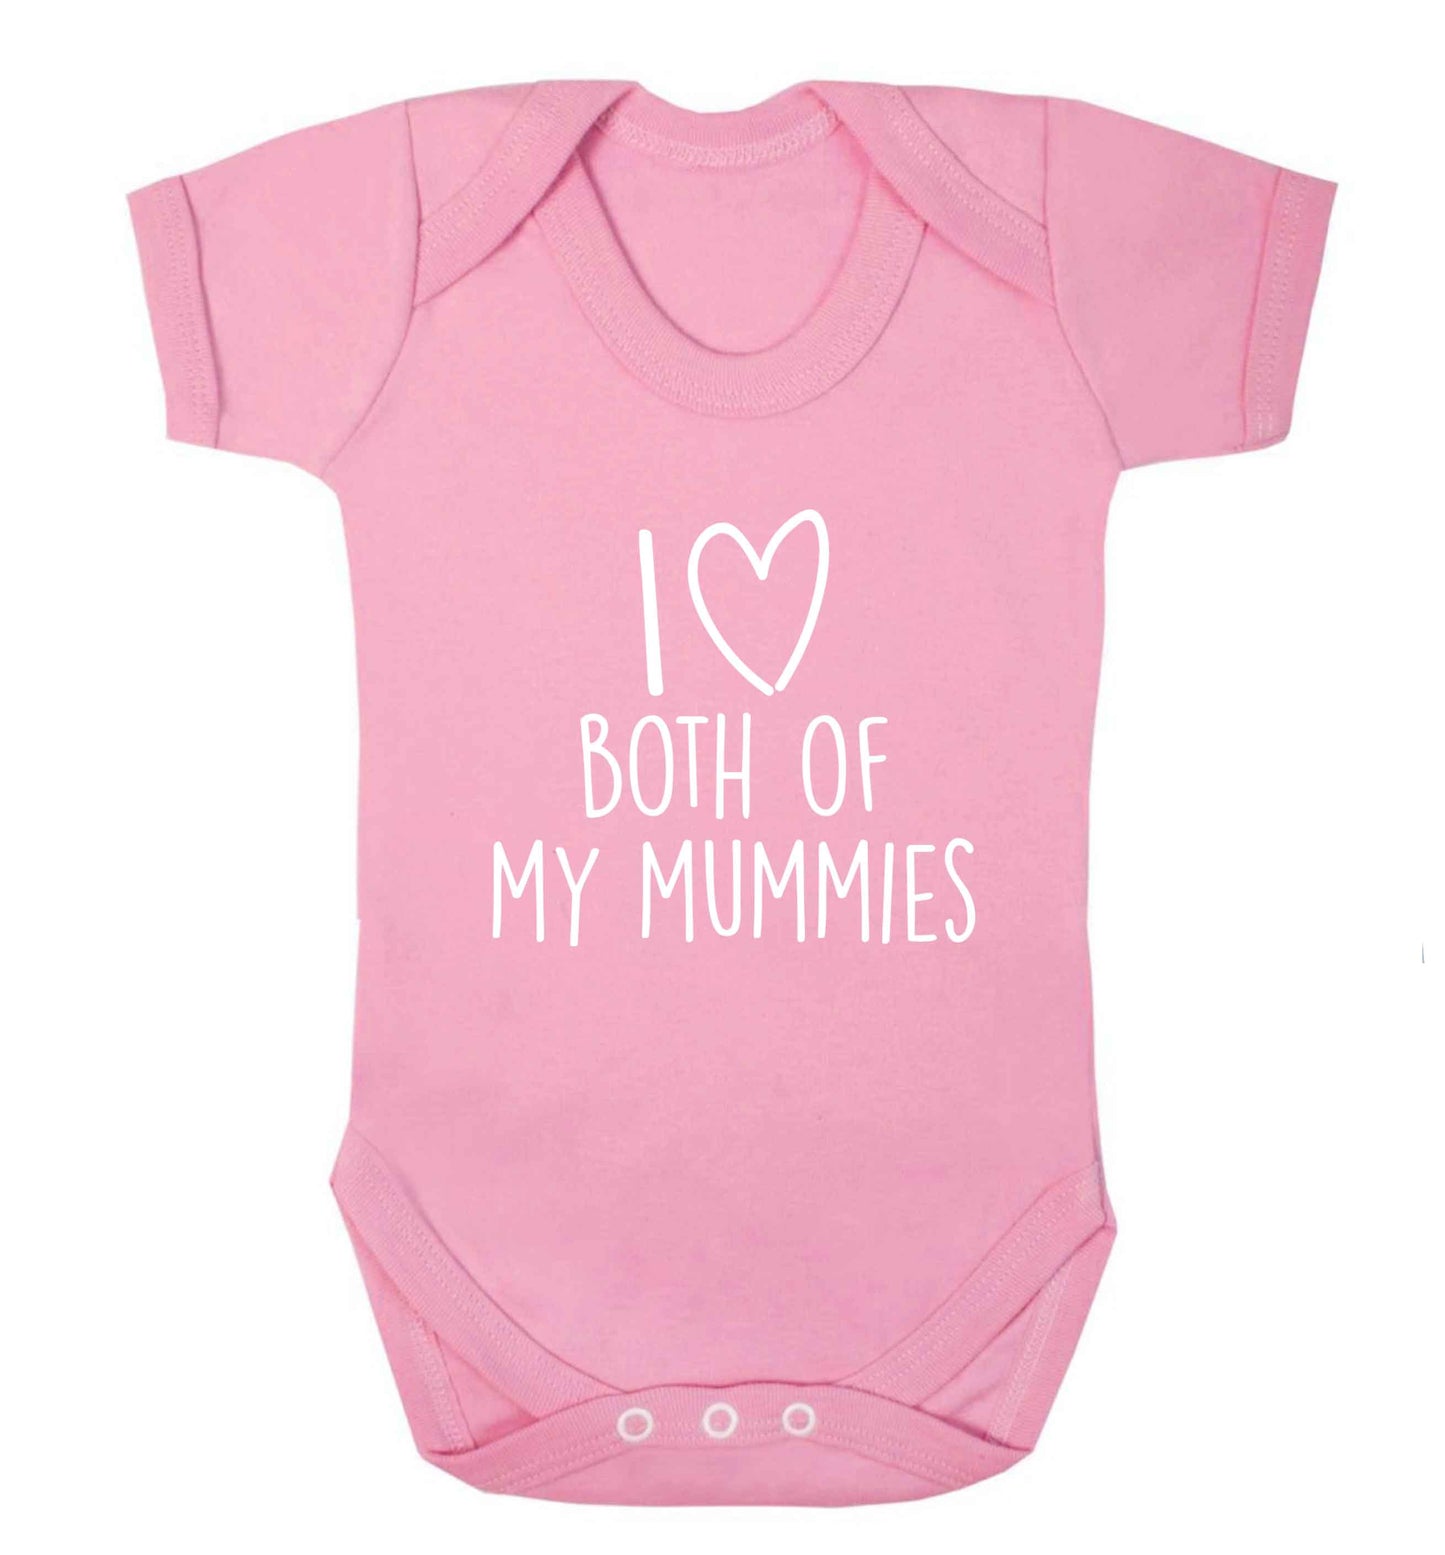 I love both of my mummies baby vest pale pink 18-24 months